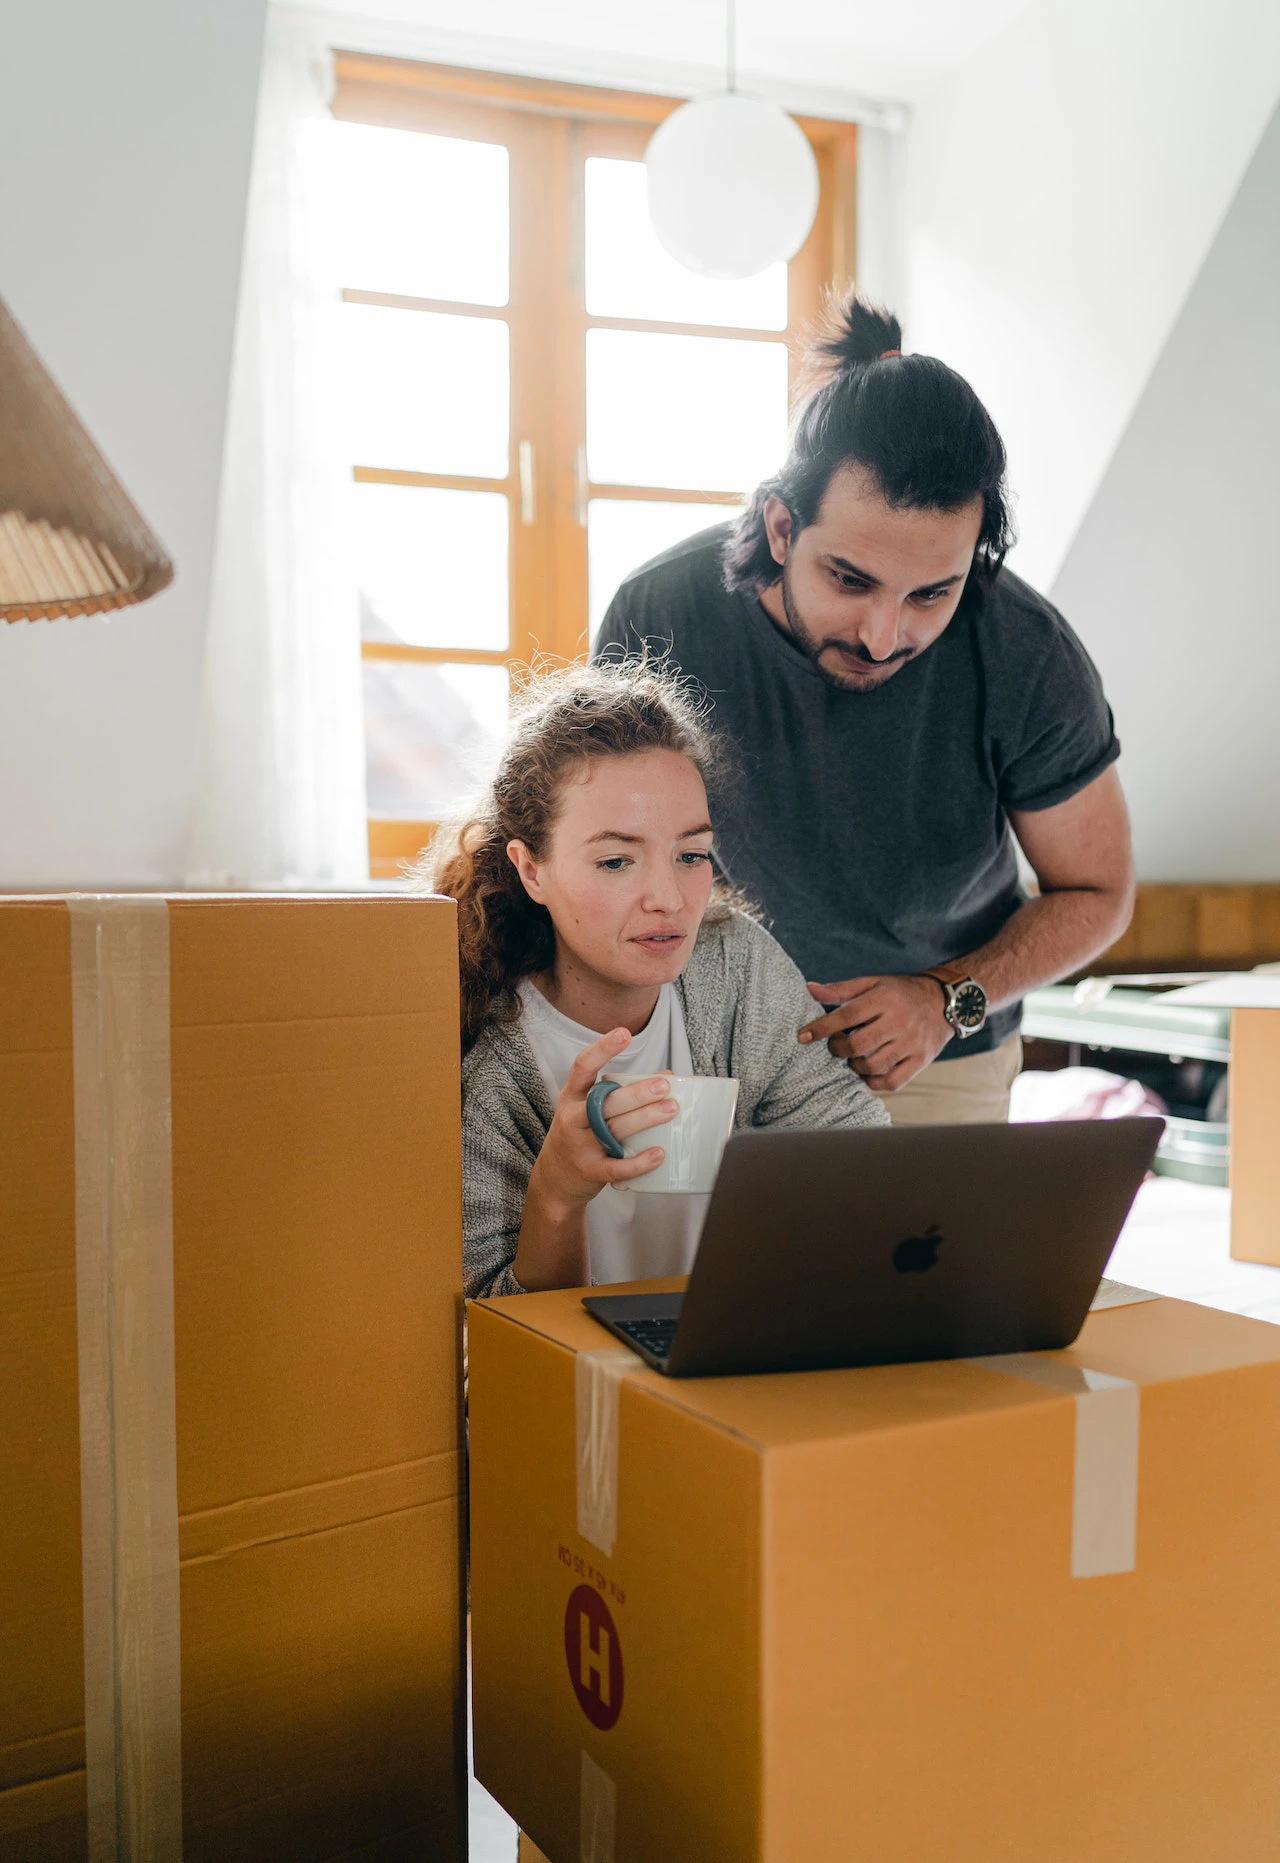 Couple looking at laptop amongst cardboard boxes